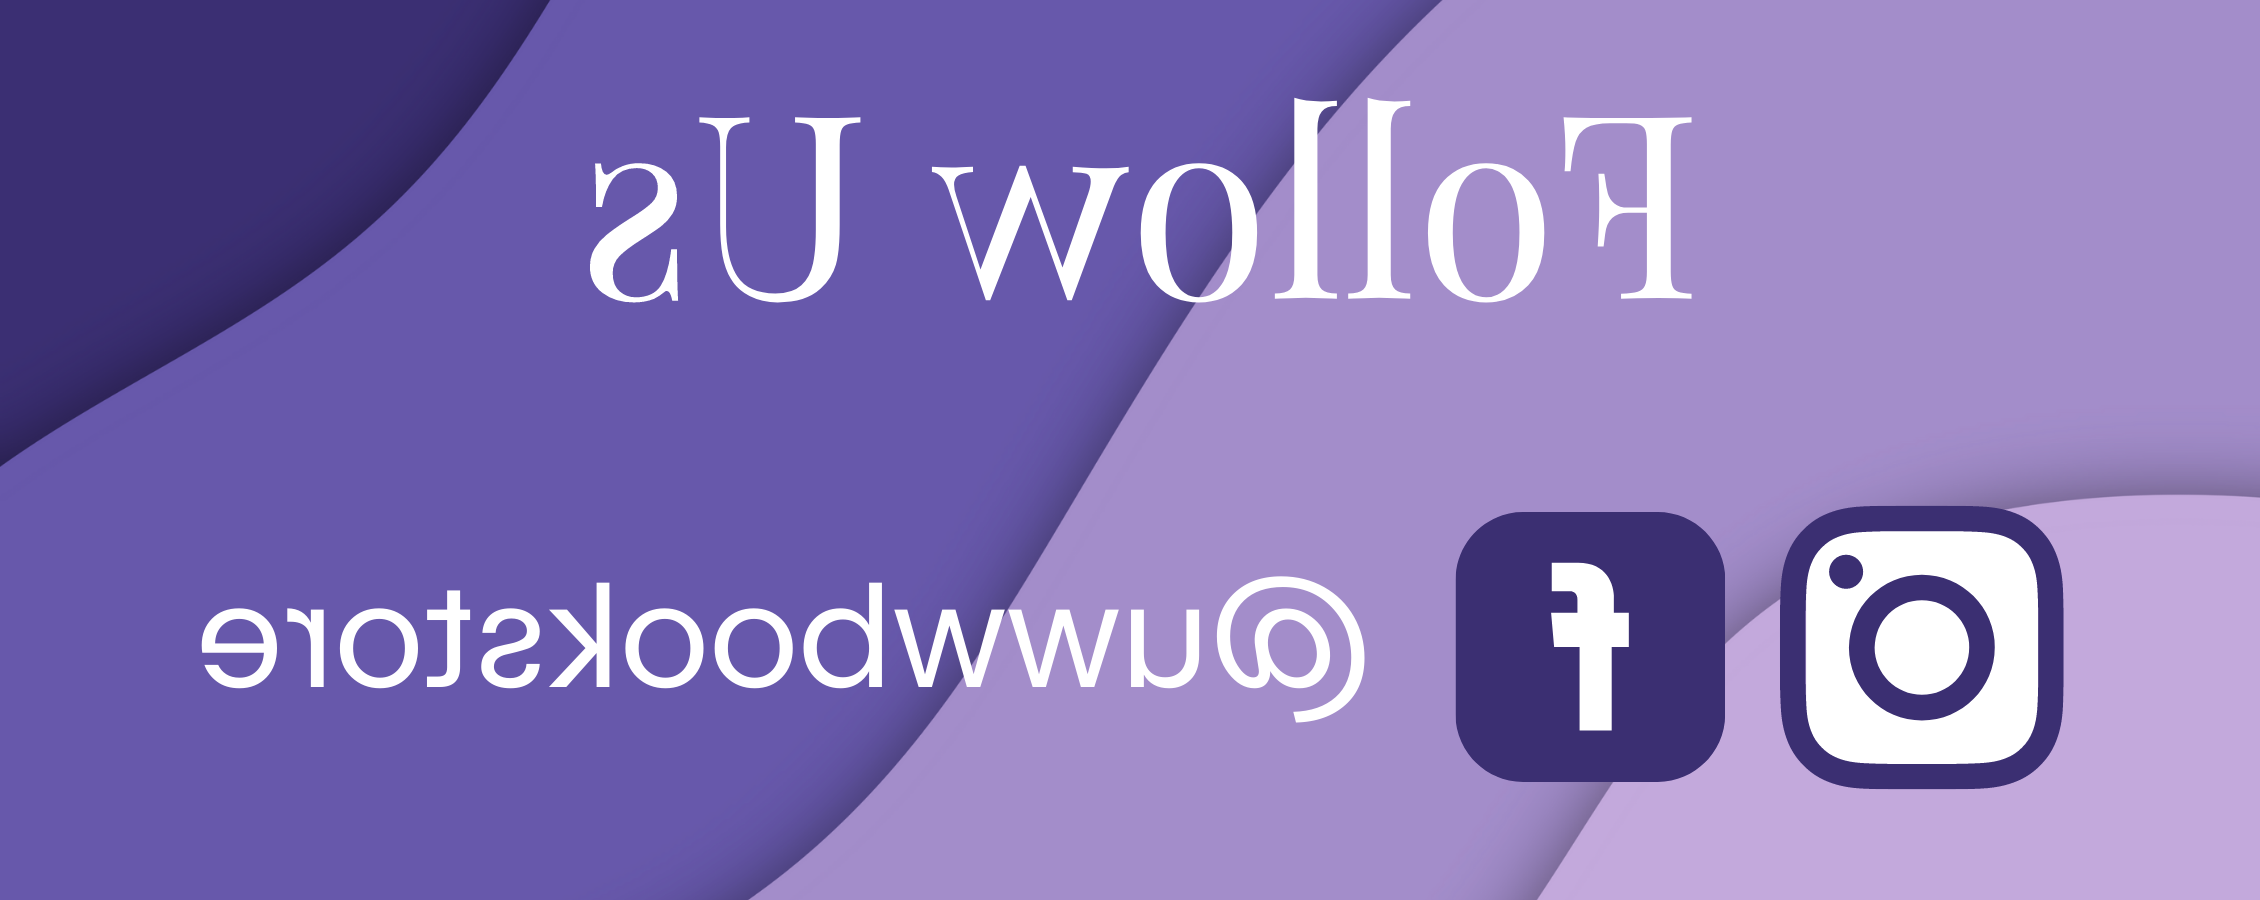 Follow Us on Instagram and Facebook @uwwbookstore